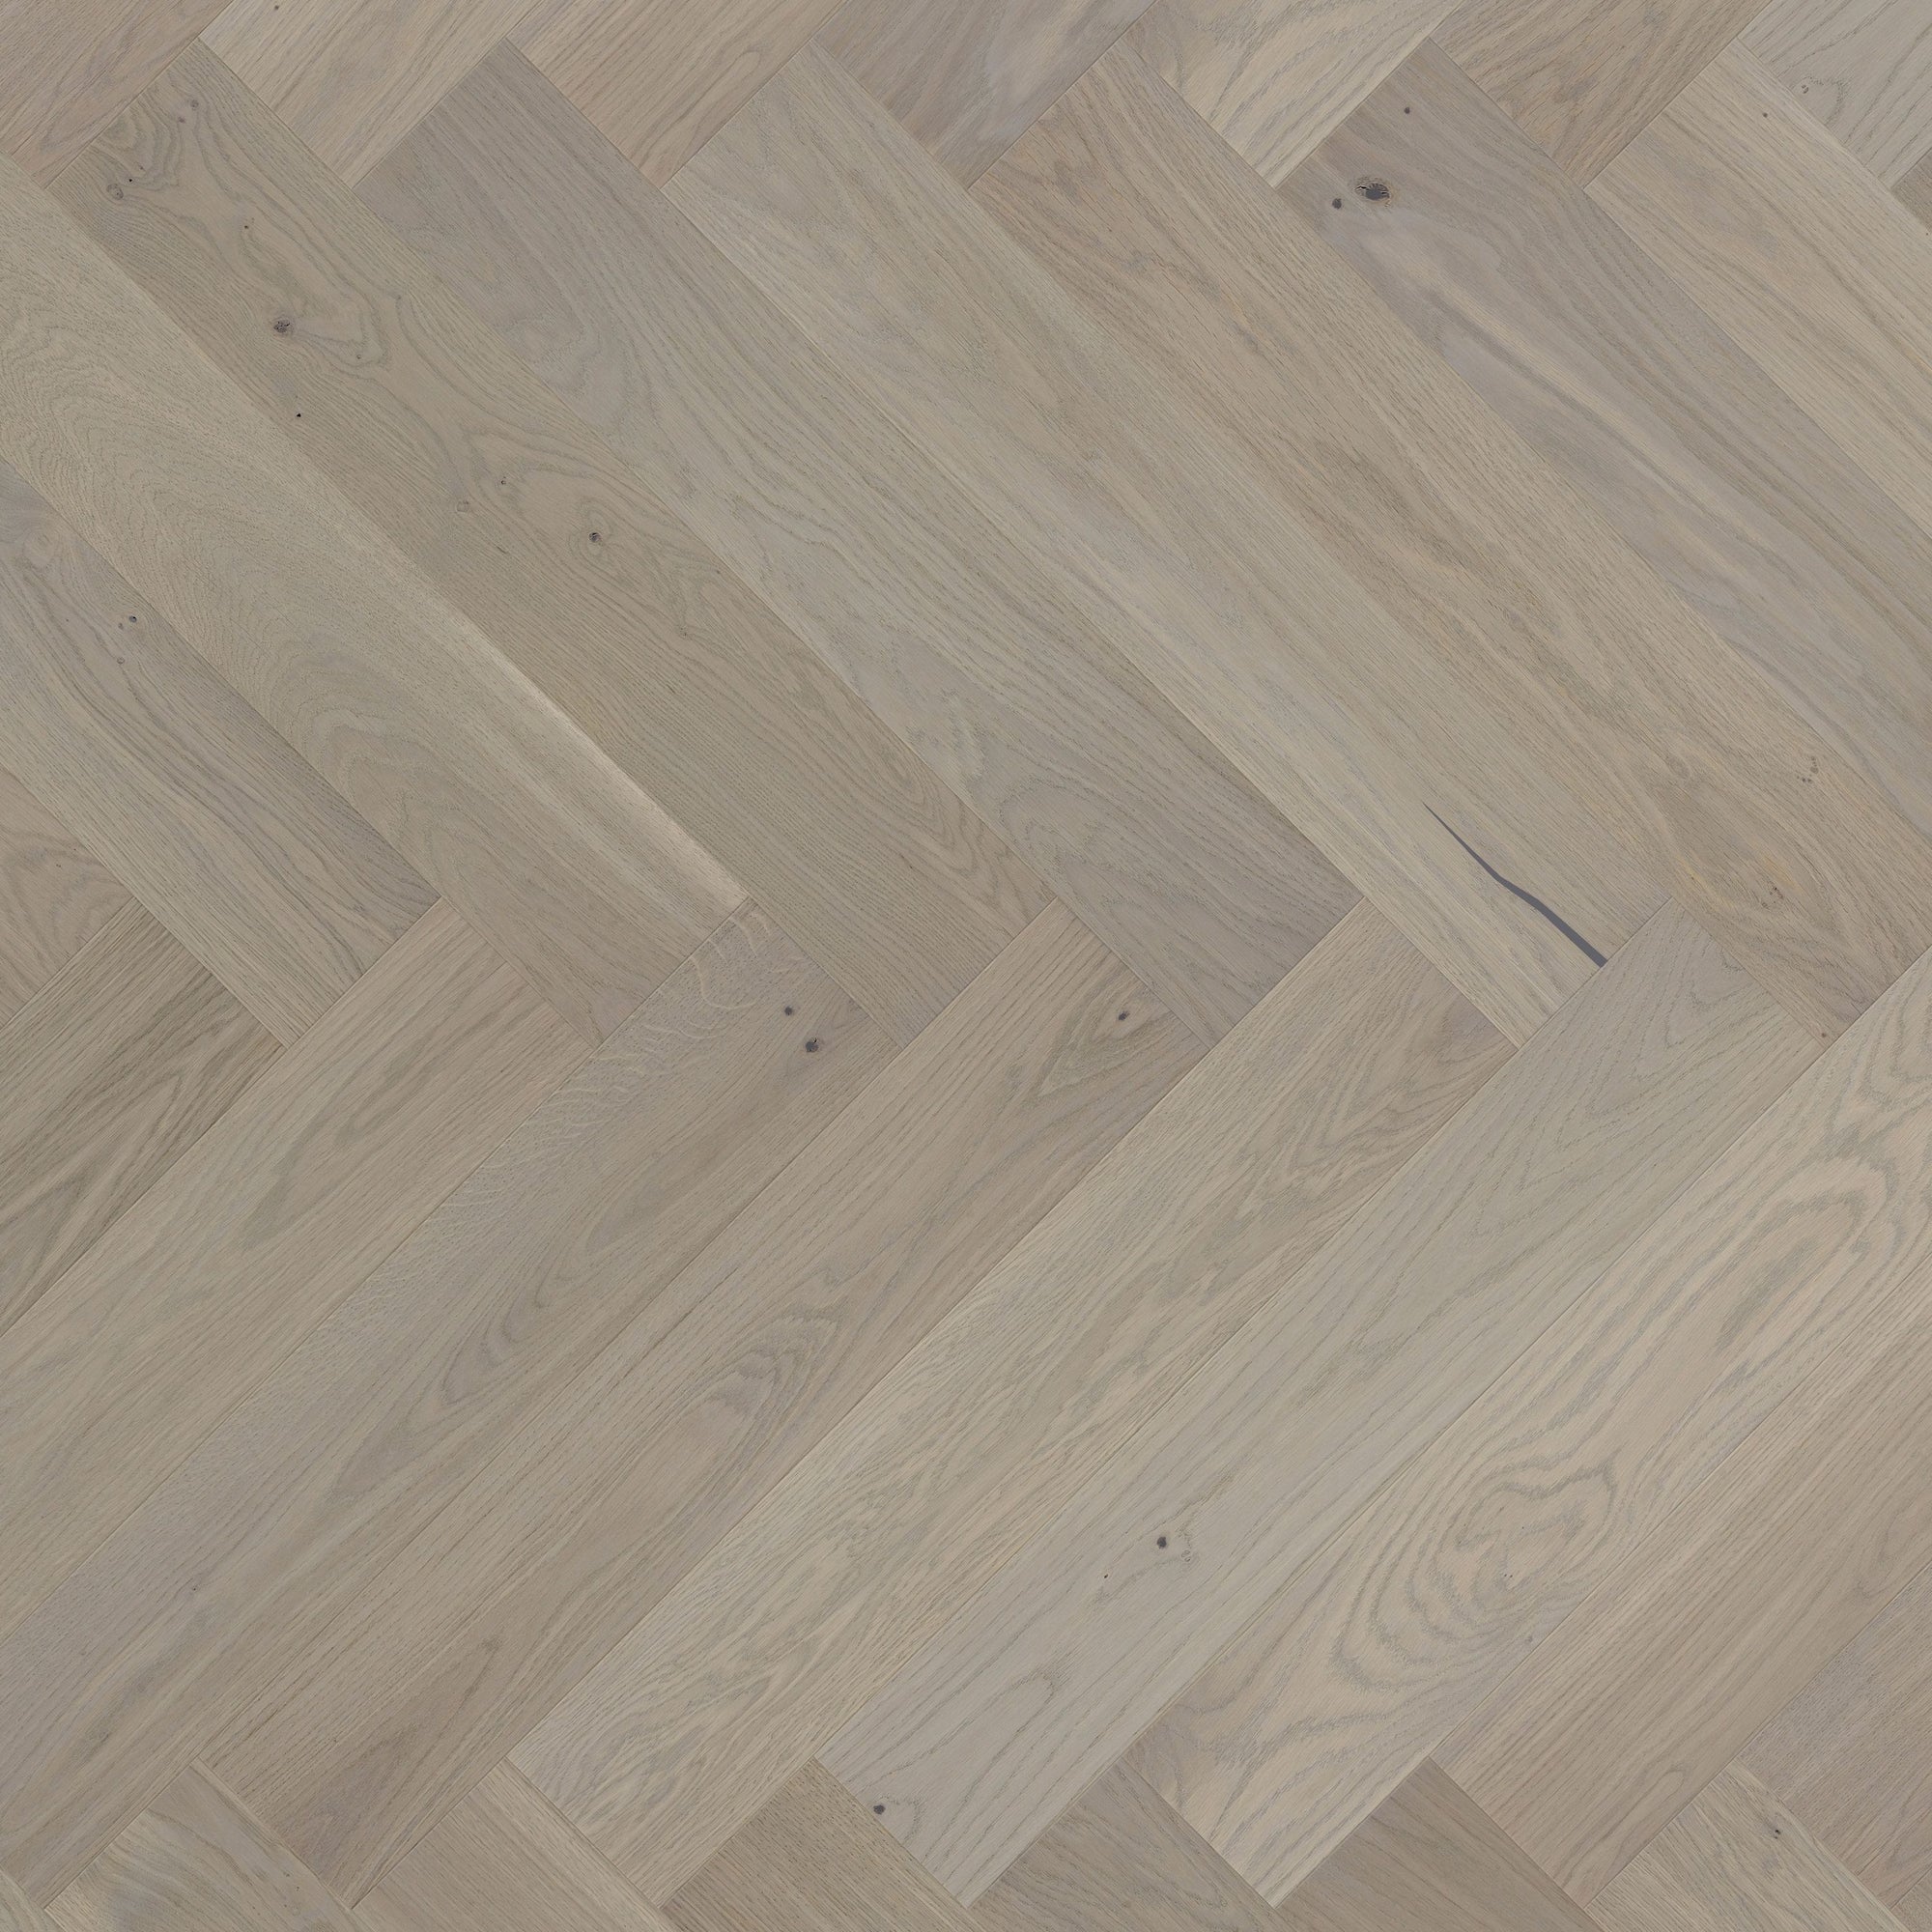 Brushed & Stained Ashton & Rose Gillow natural oak engineered hardwood flooring from our Herringbone collection